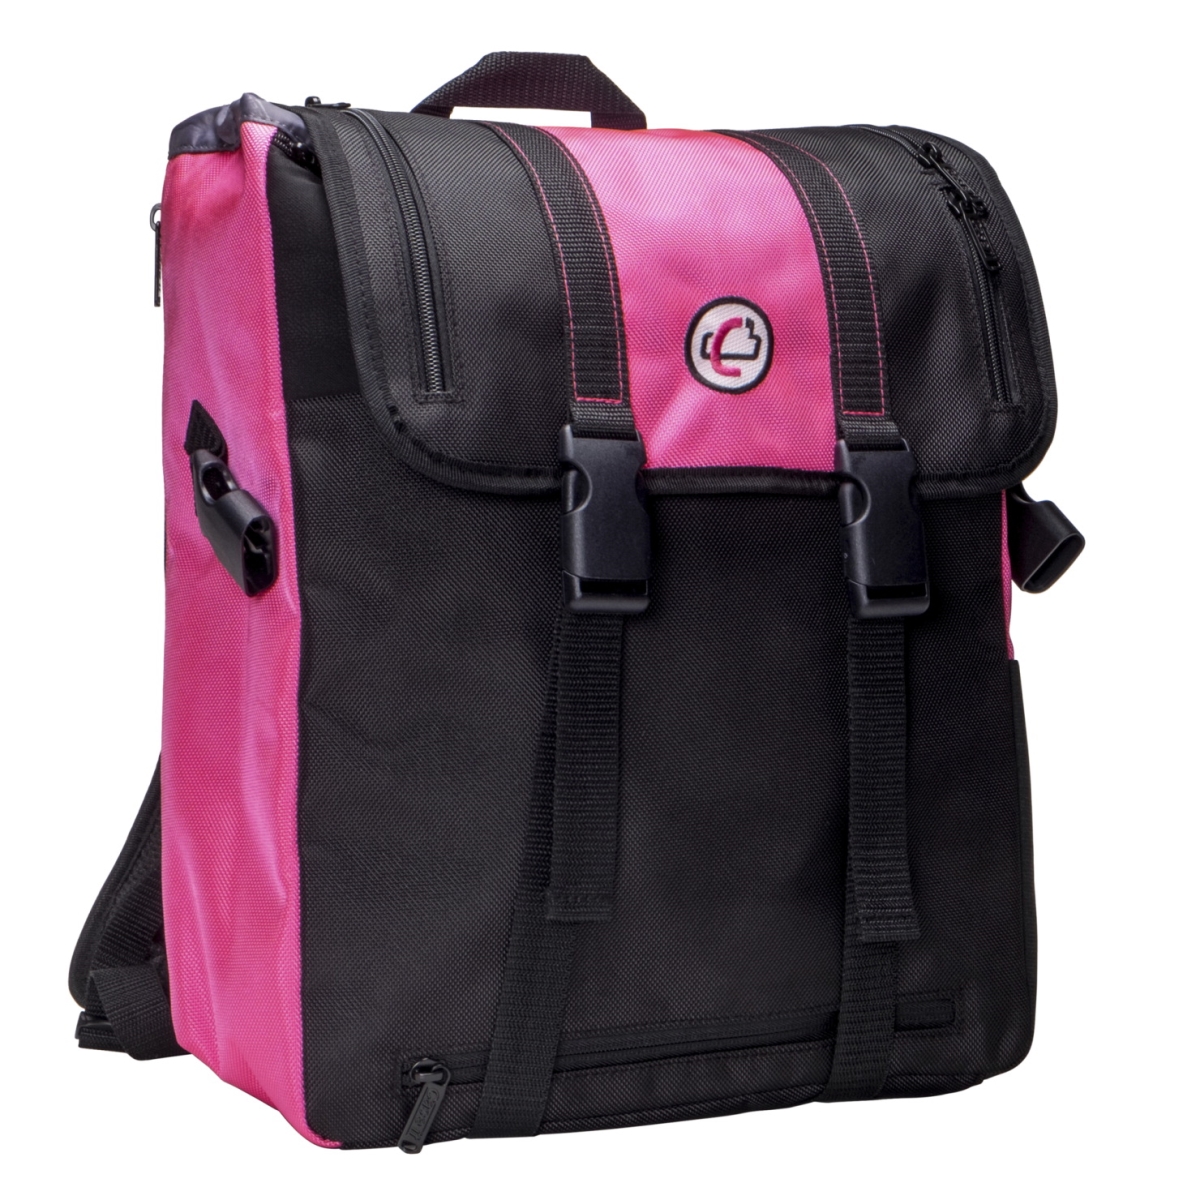 2004447 6 X 13 X 15 In. Backpack With Binder Holder, Pink With Grey Trim